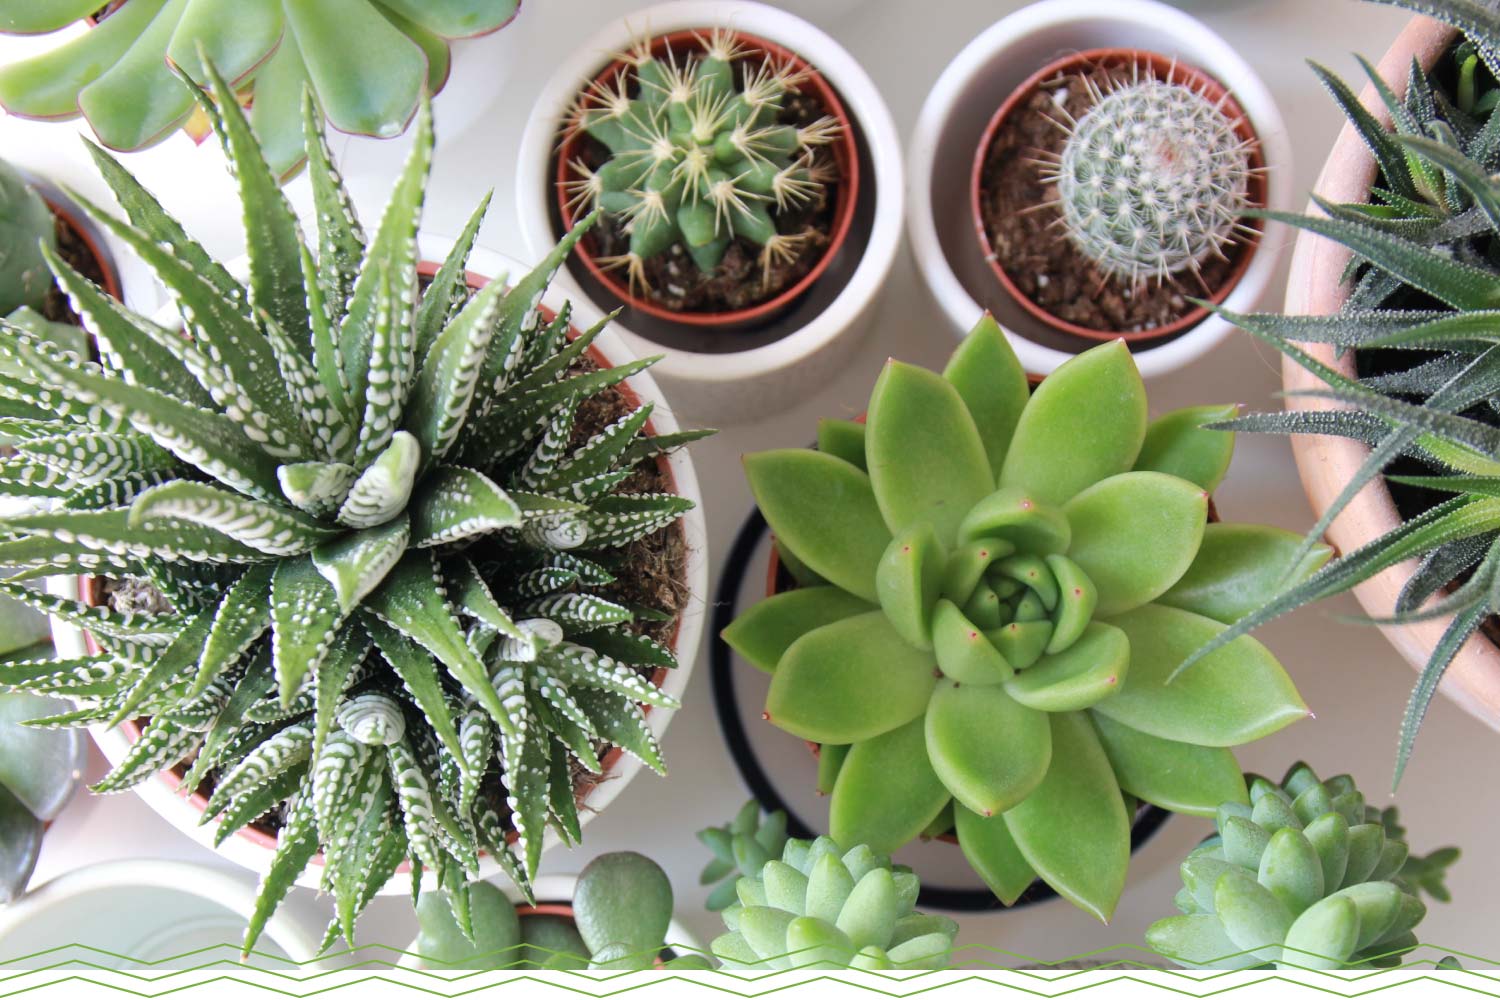 Things to consider while choosing succulents